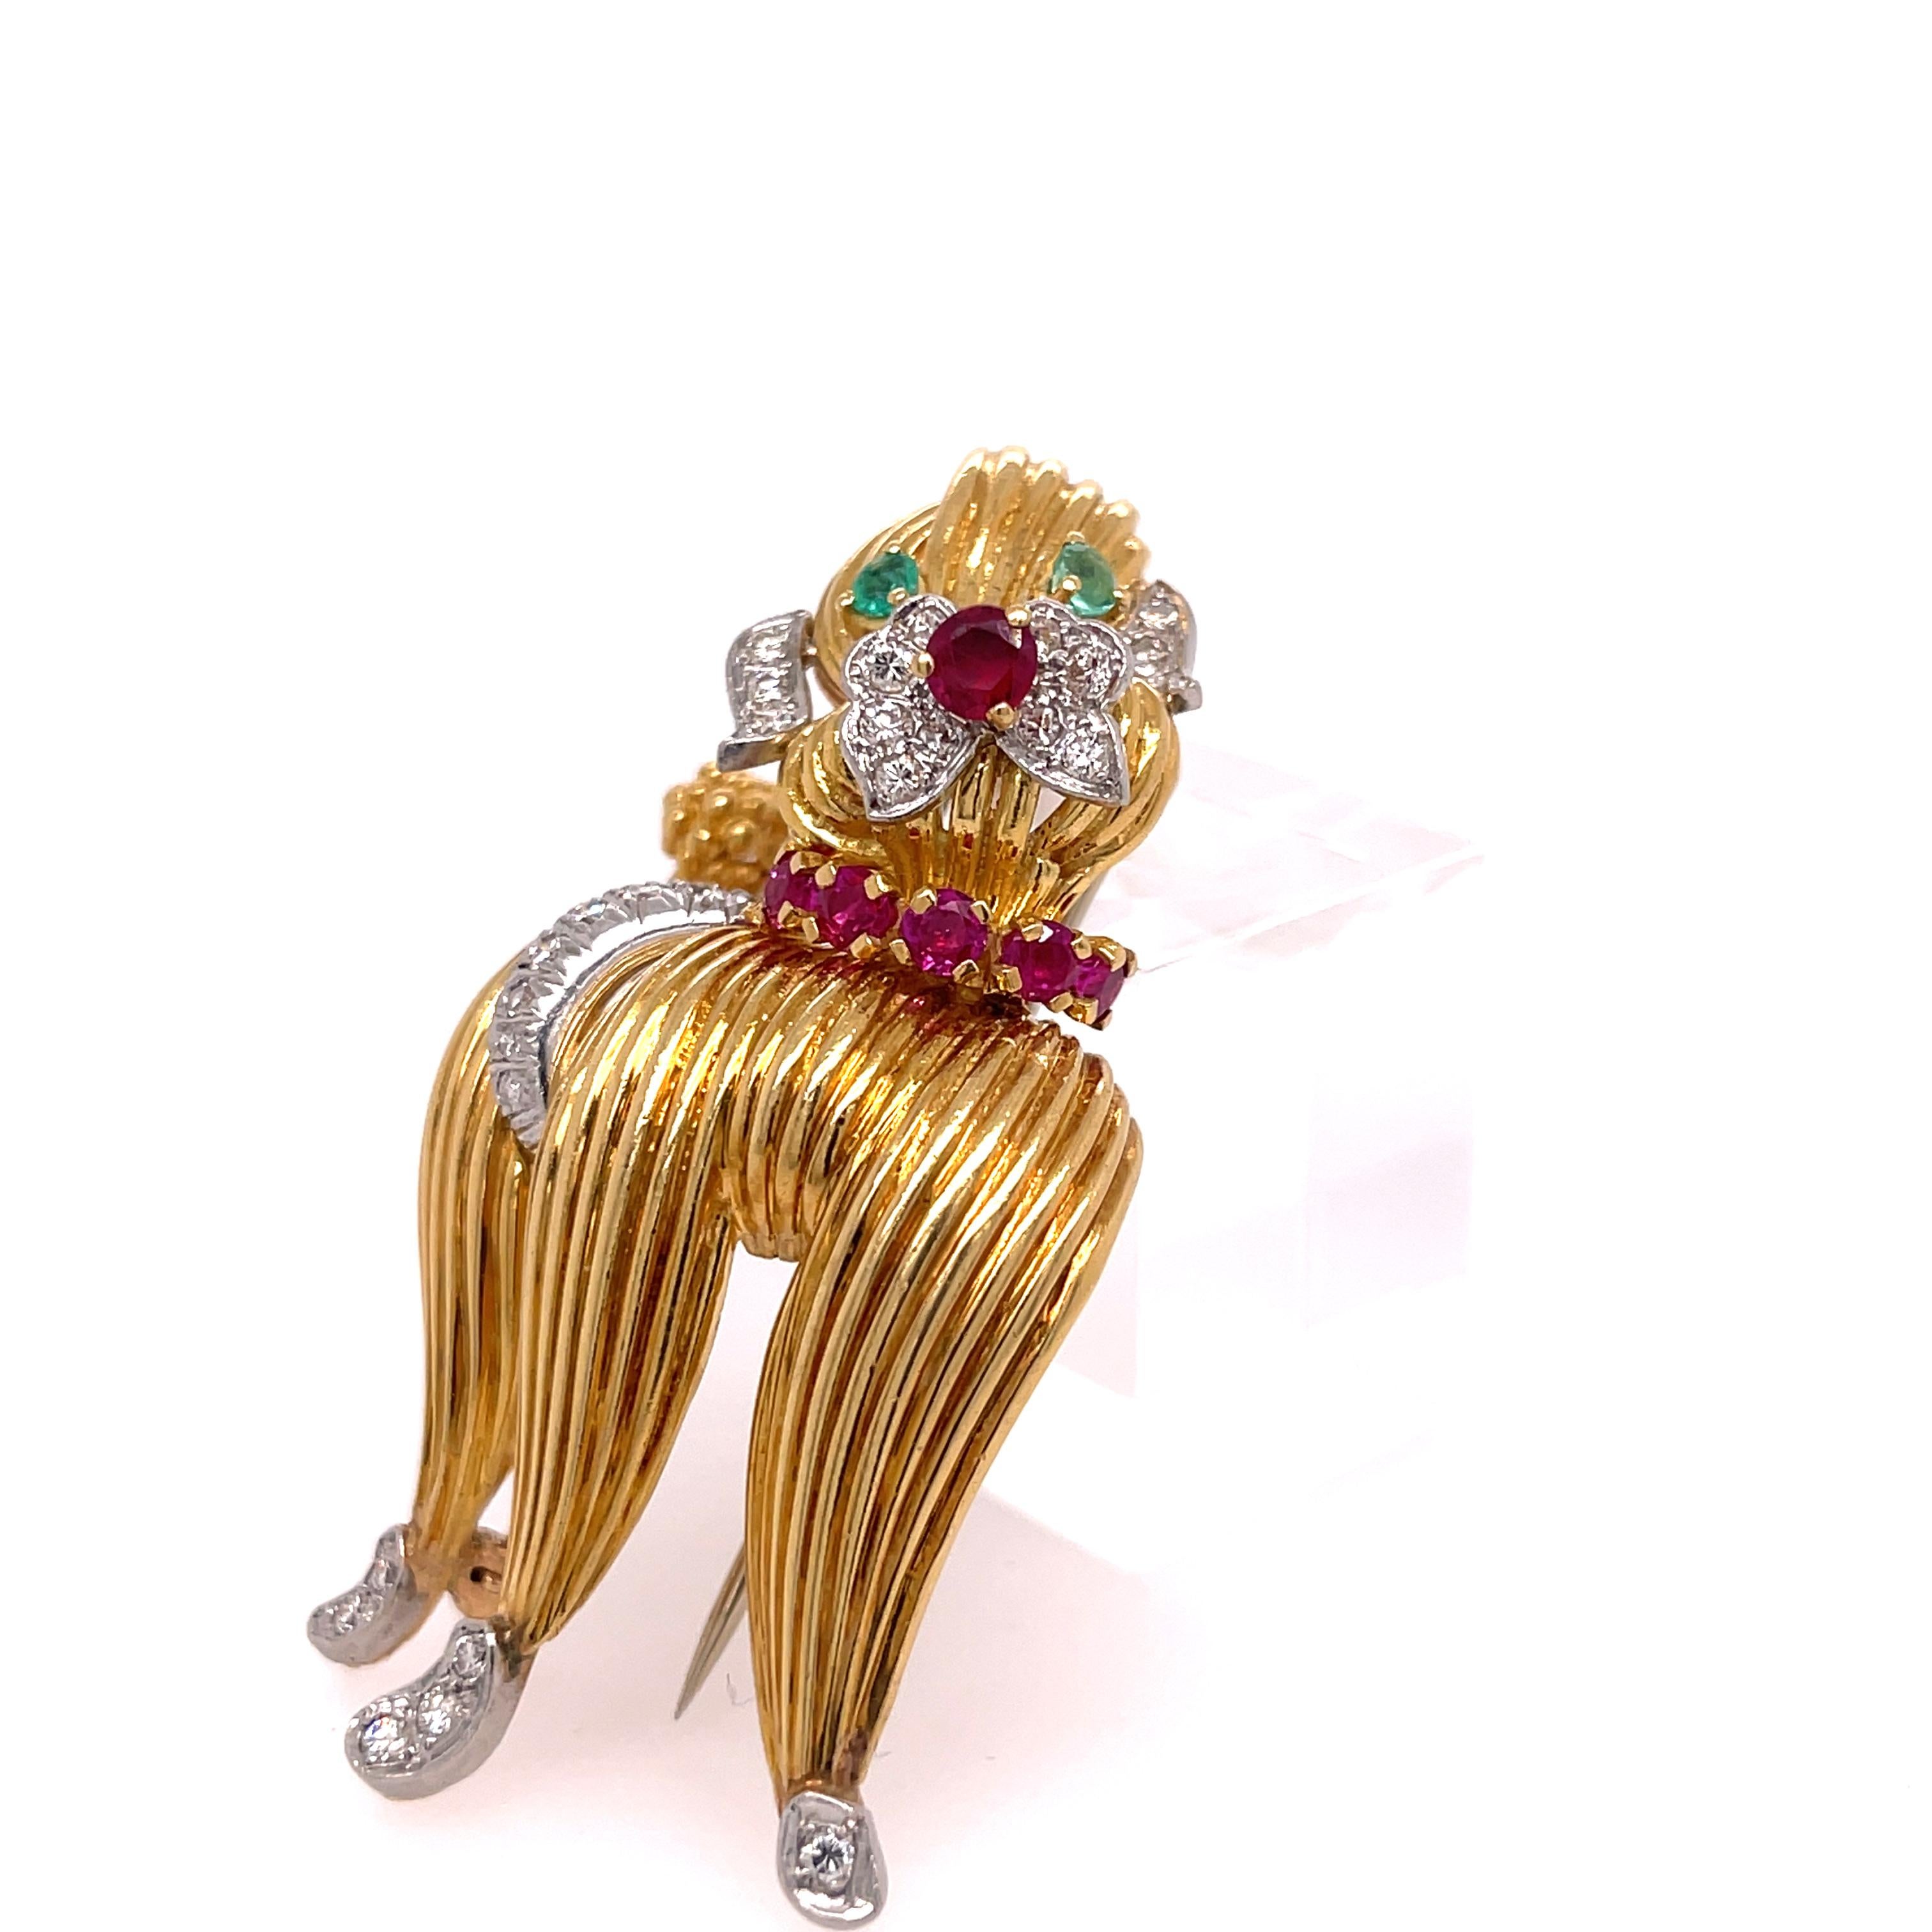 Poodle Pin from Tiffany and Company.  18K Yellow Gold Diamond, Ruby and Emerald Eyes!
One inch by 2 inches.  Stamped 18K Tiffany & Co.
